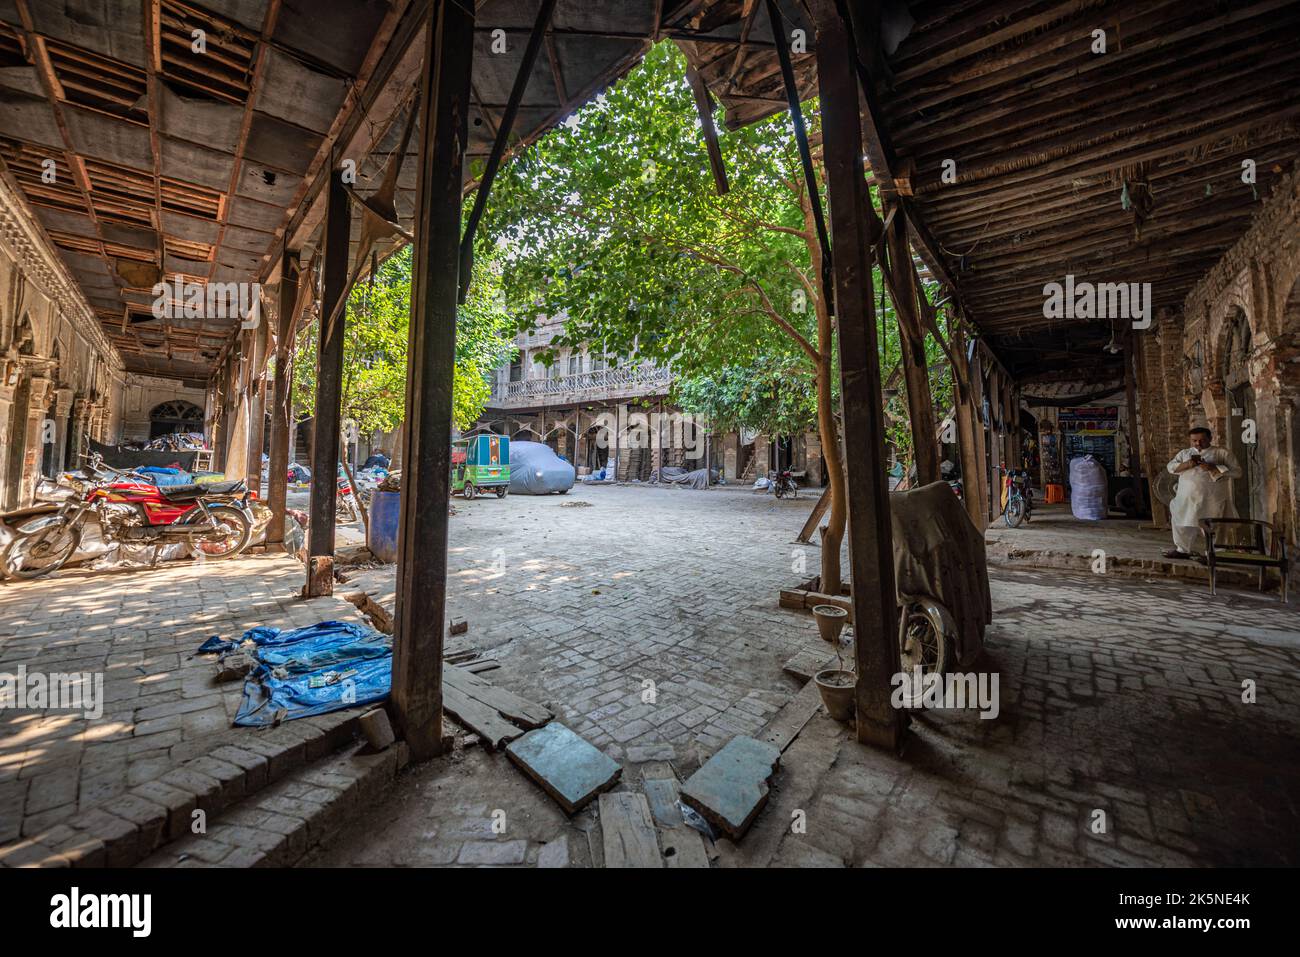 Courtyard of an old wooden building, Peshawar,  Khyber Pakhtunkhwa Province, Pakistan Stock Photo